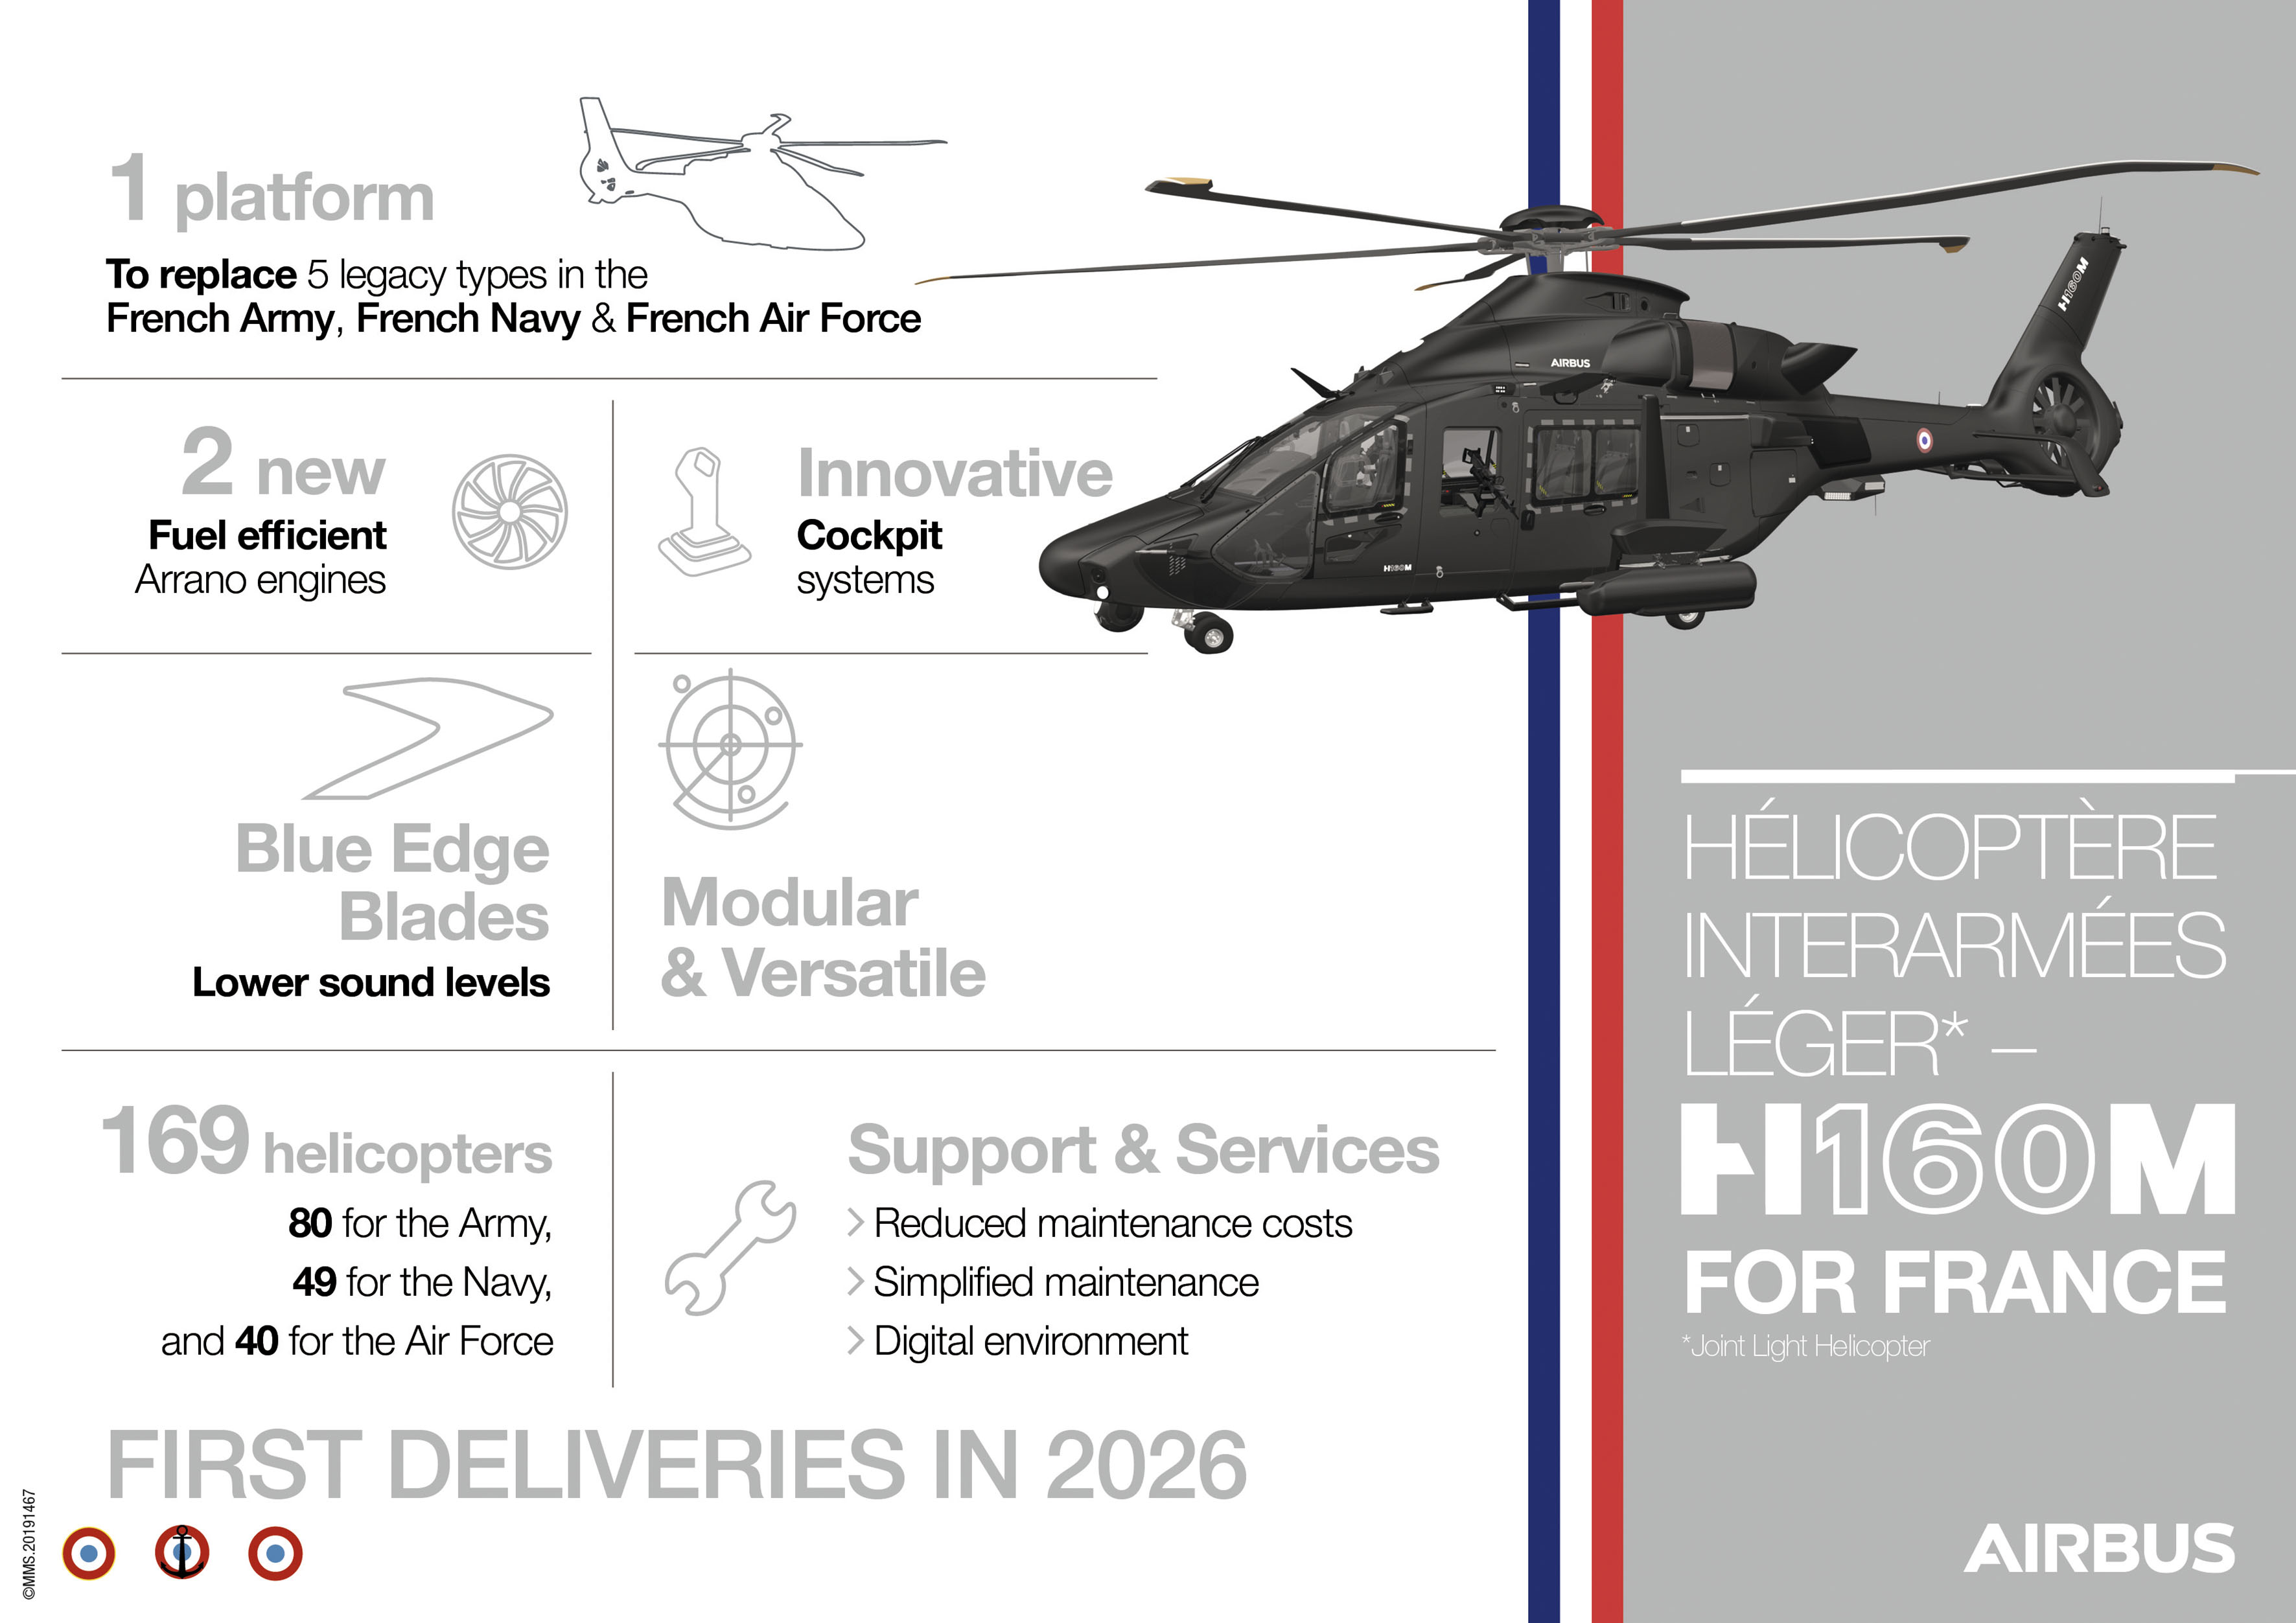 An infographic showing some of the key features of the H160M helicopter and the HIL programme for the French armed forces. (Airbus Helicopters)